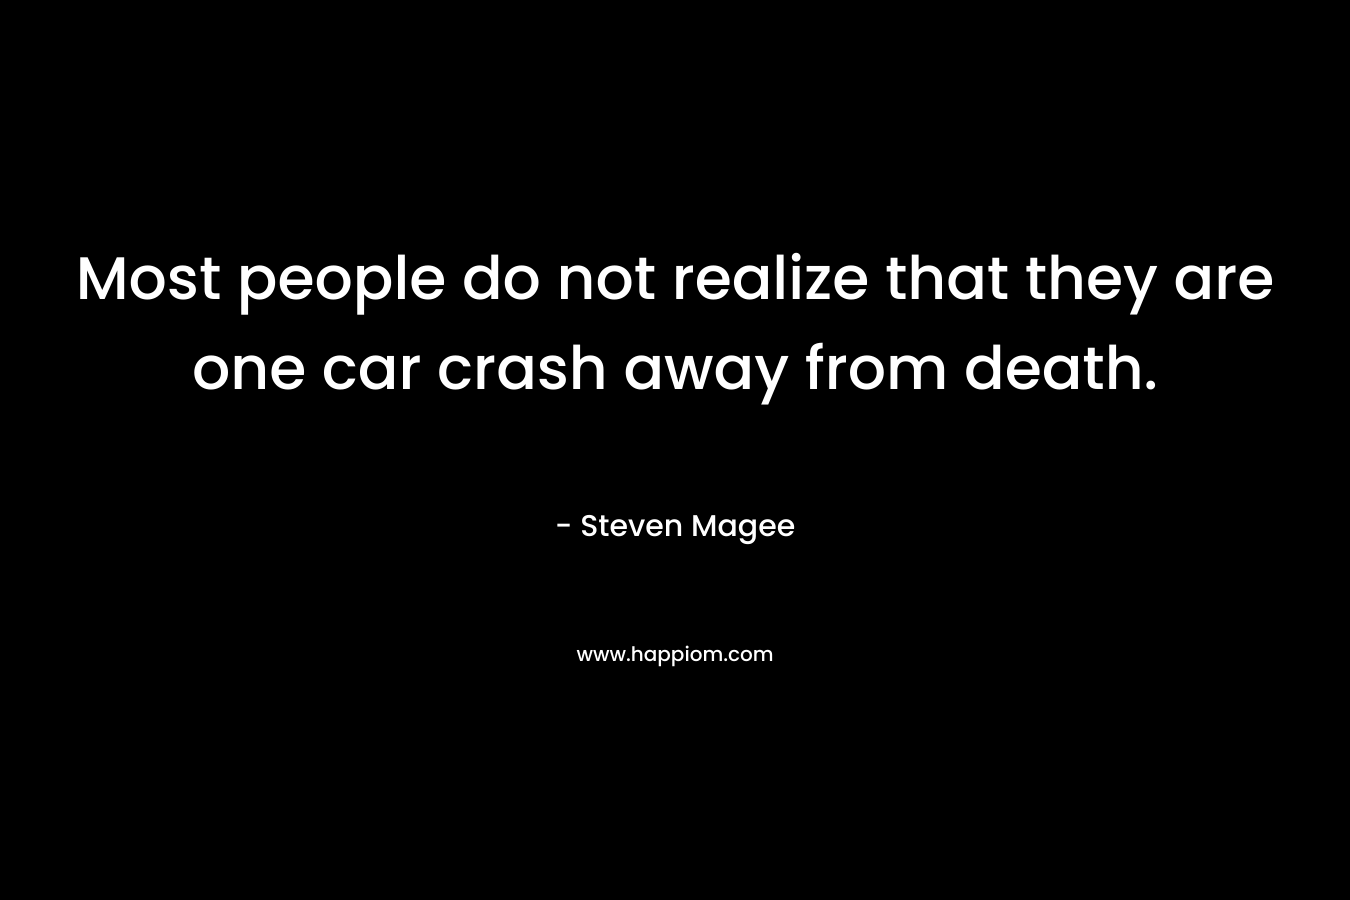 Most people do not realize that they are one car crash away from death. – Steven Magee